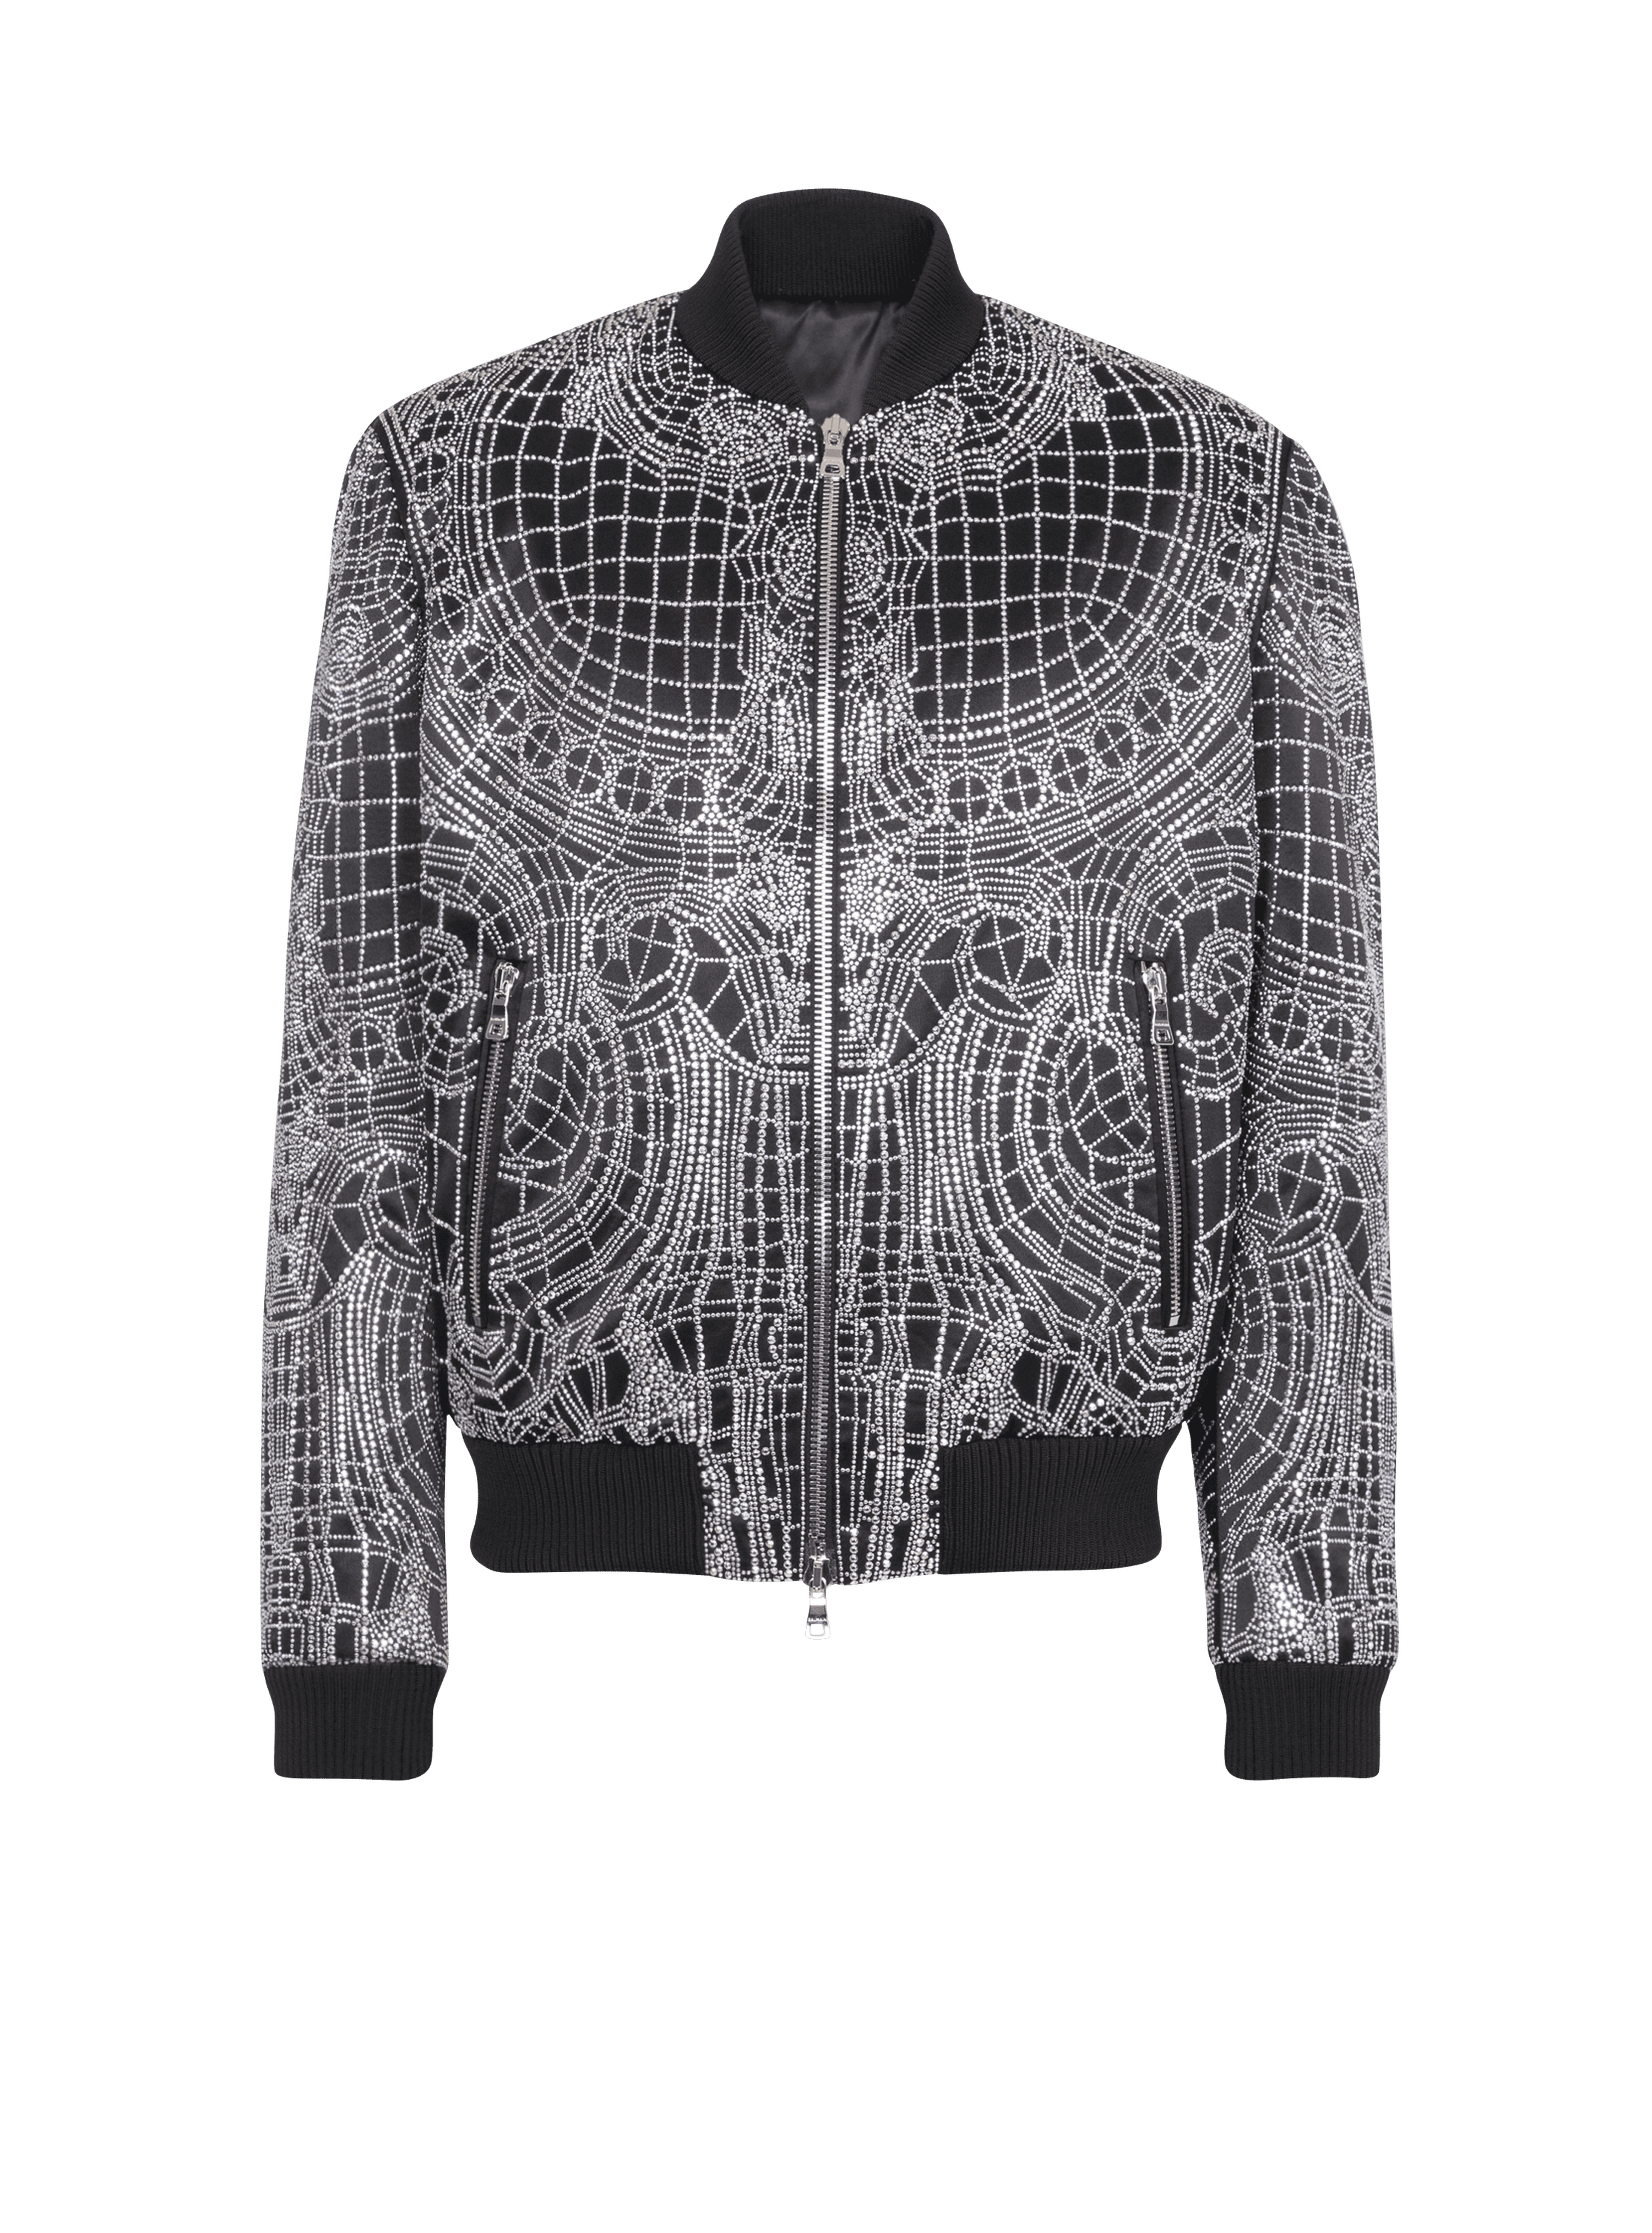 Embroidered silk bomber jacket, silver